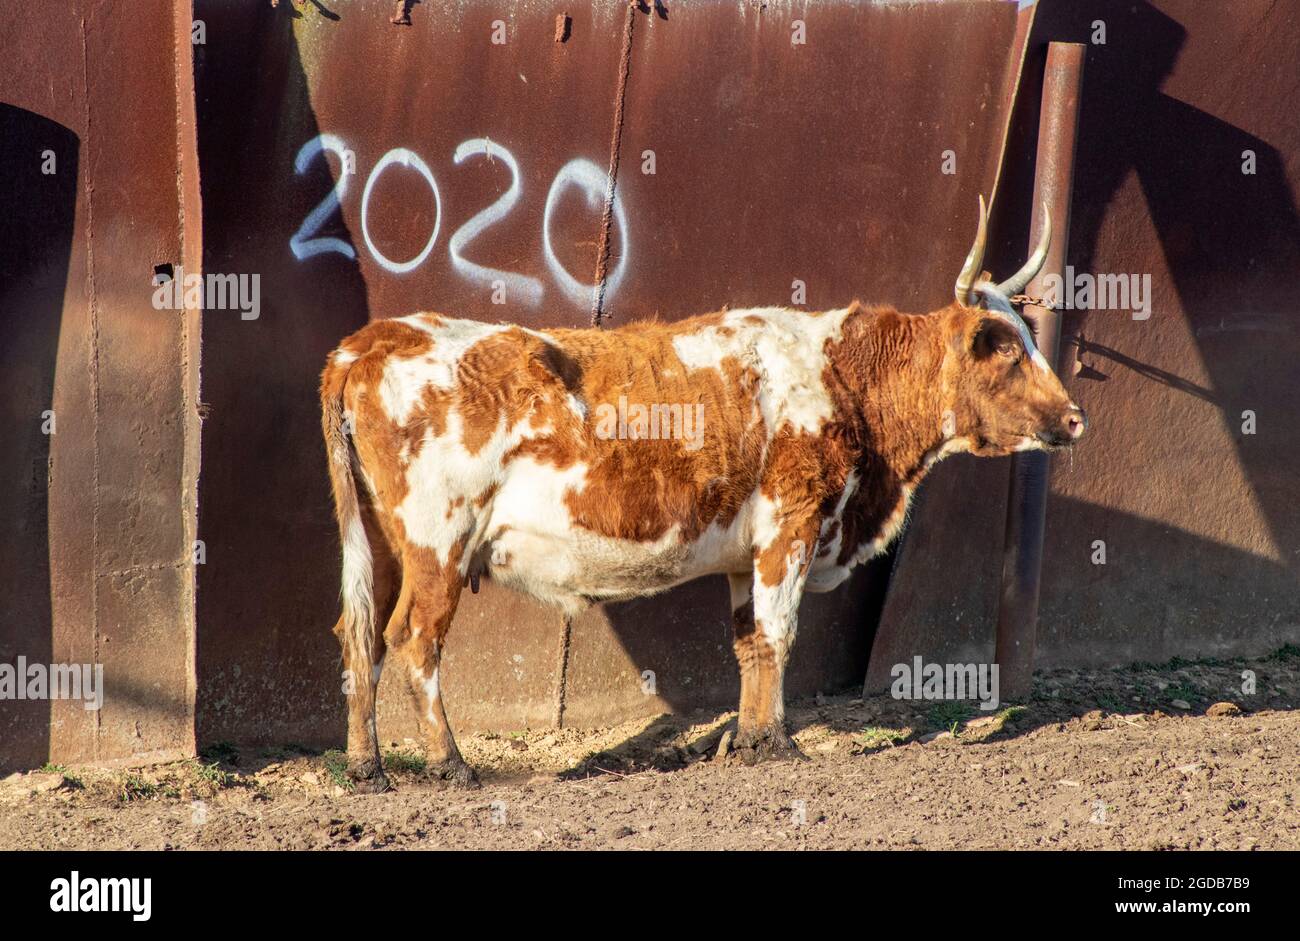 Bull with Horns on the farm in front of painted 2020 sign Stock Photo